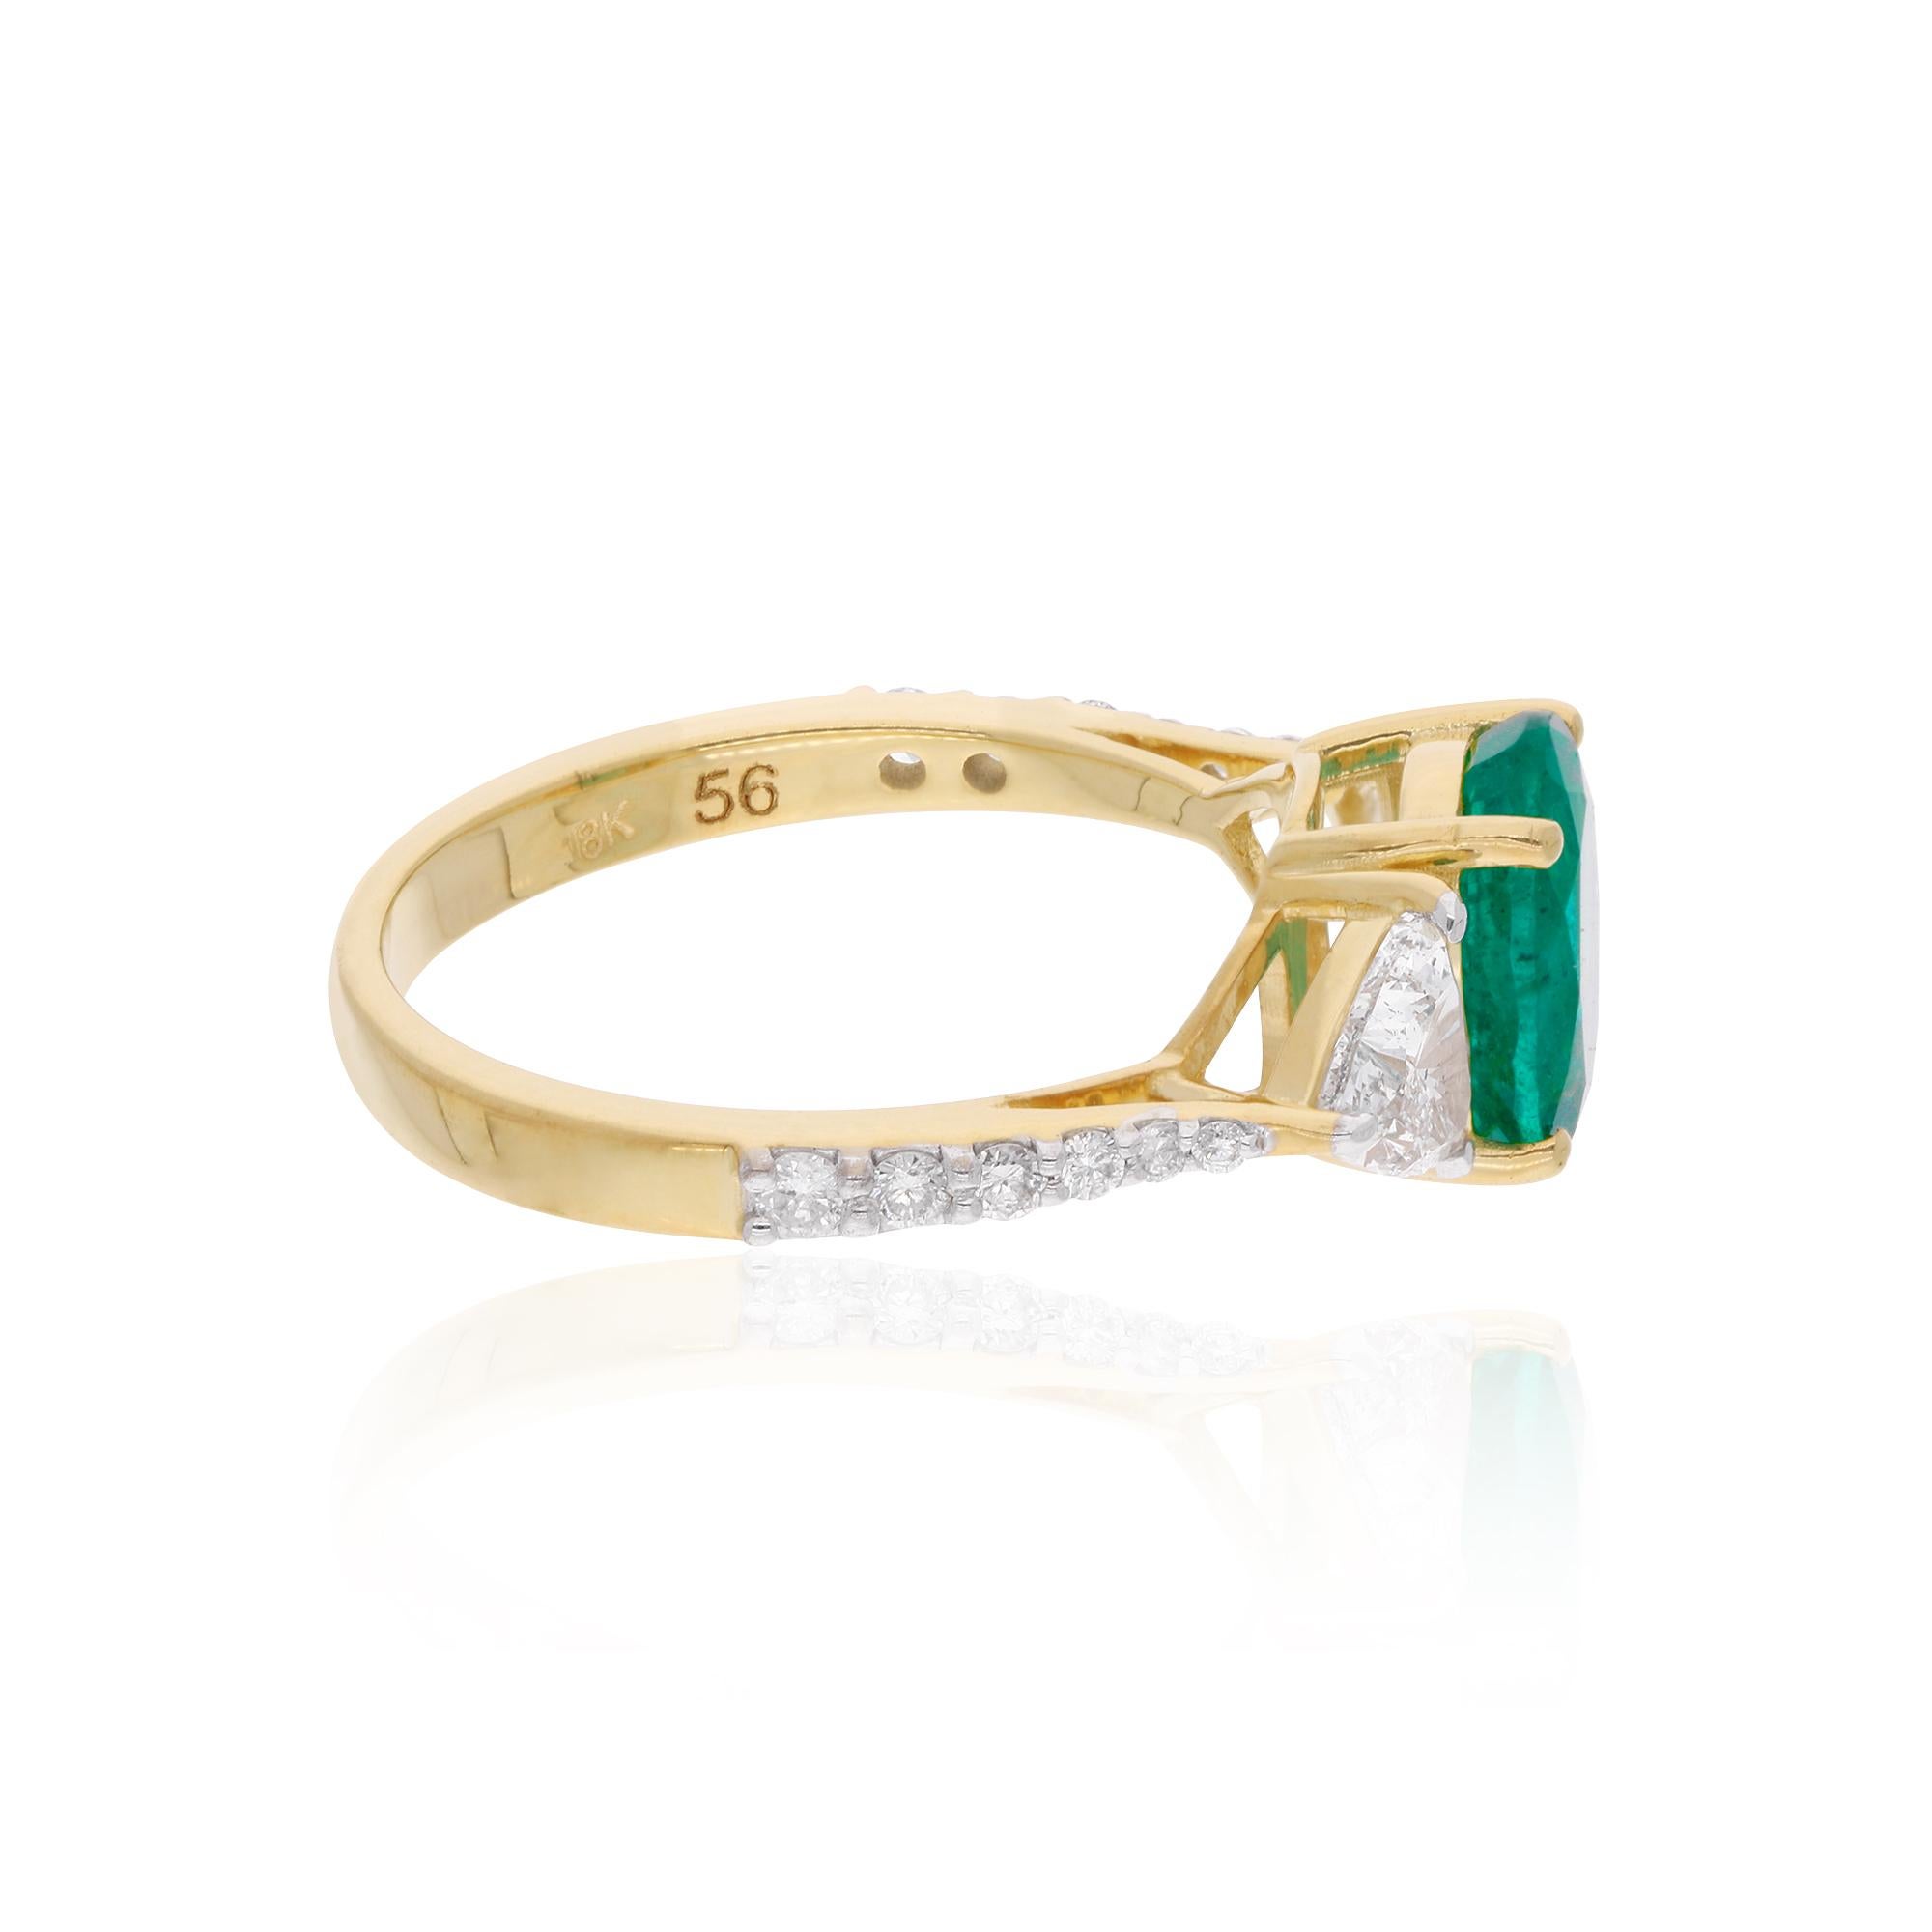 Immerse yourself in the enchanting beauty of this Oval Emerald Gemstone Ring, adorned with dazzling Diamonds and meticulously handcrafted in luxurious 18 Karat Yellow Gold. This exquisite piece of fine jewelry is a celebration of elegance and